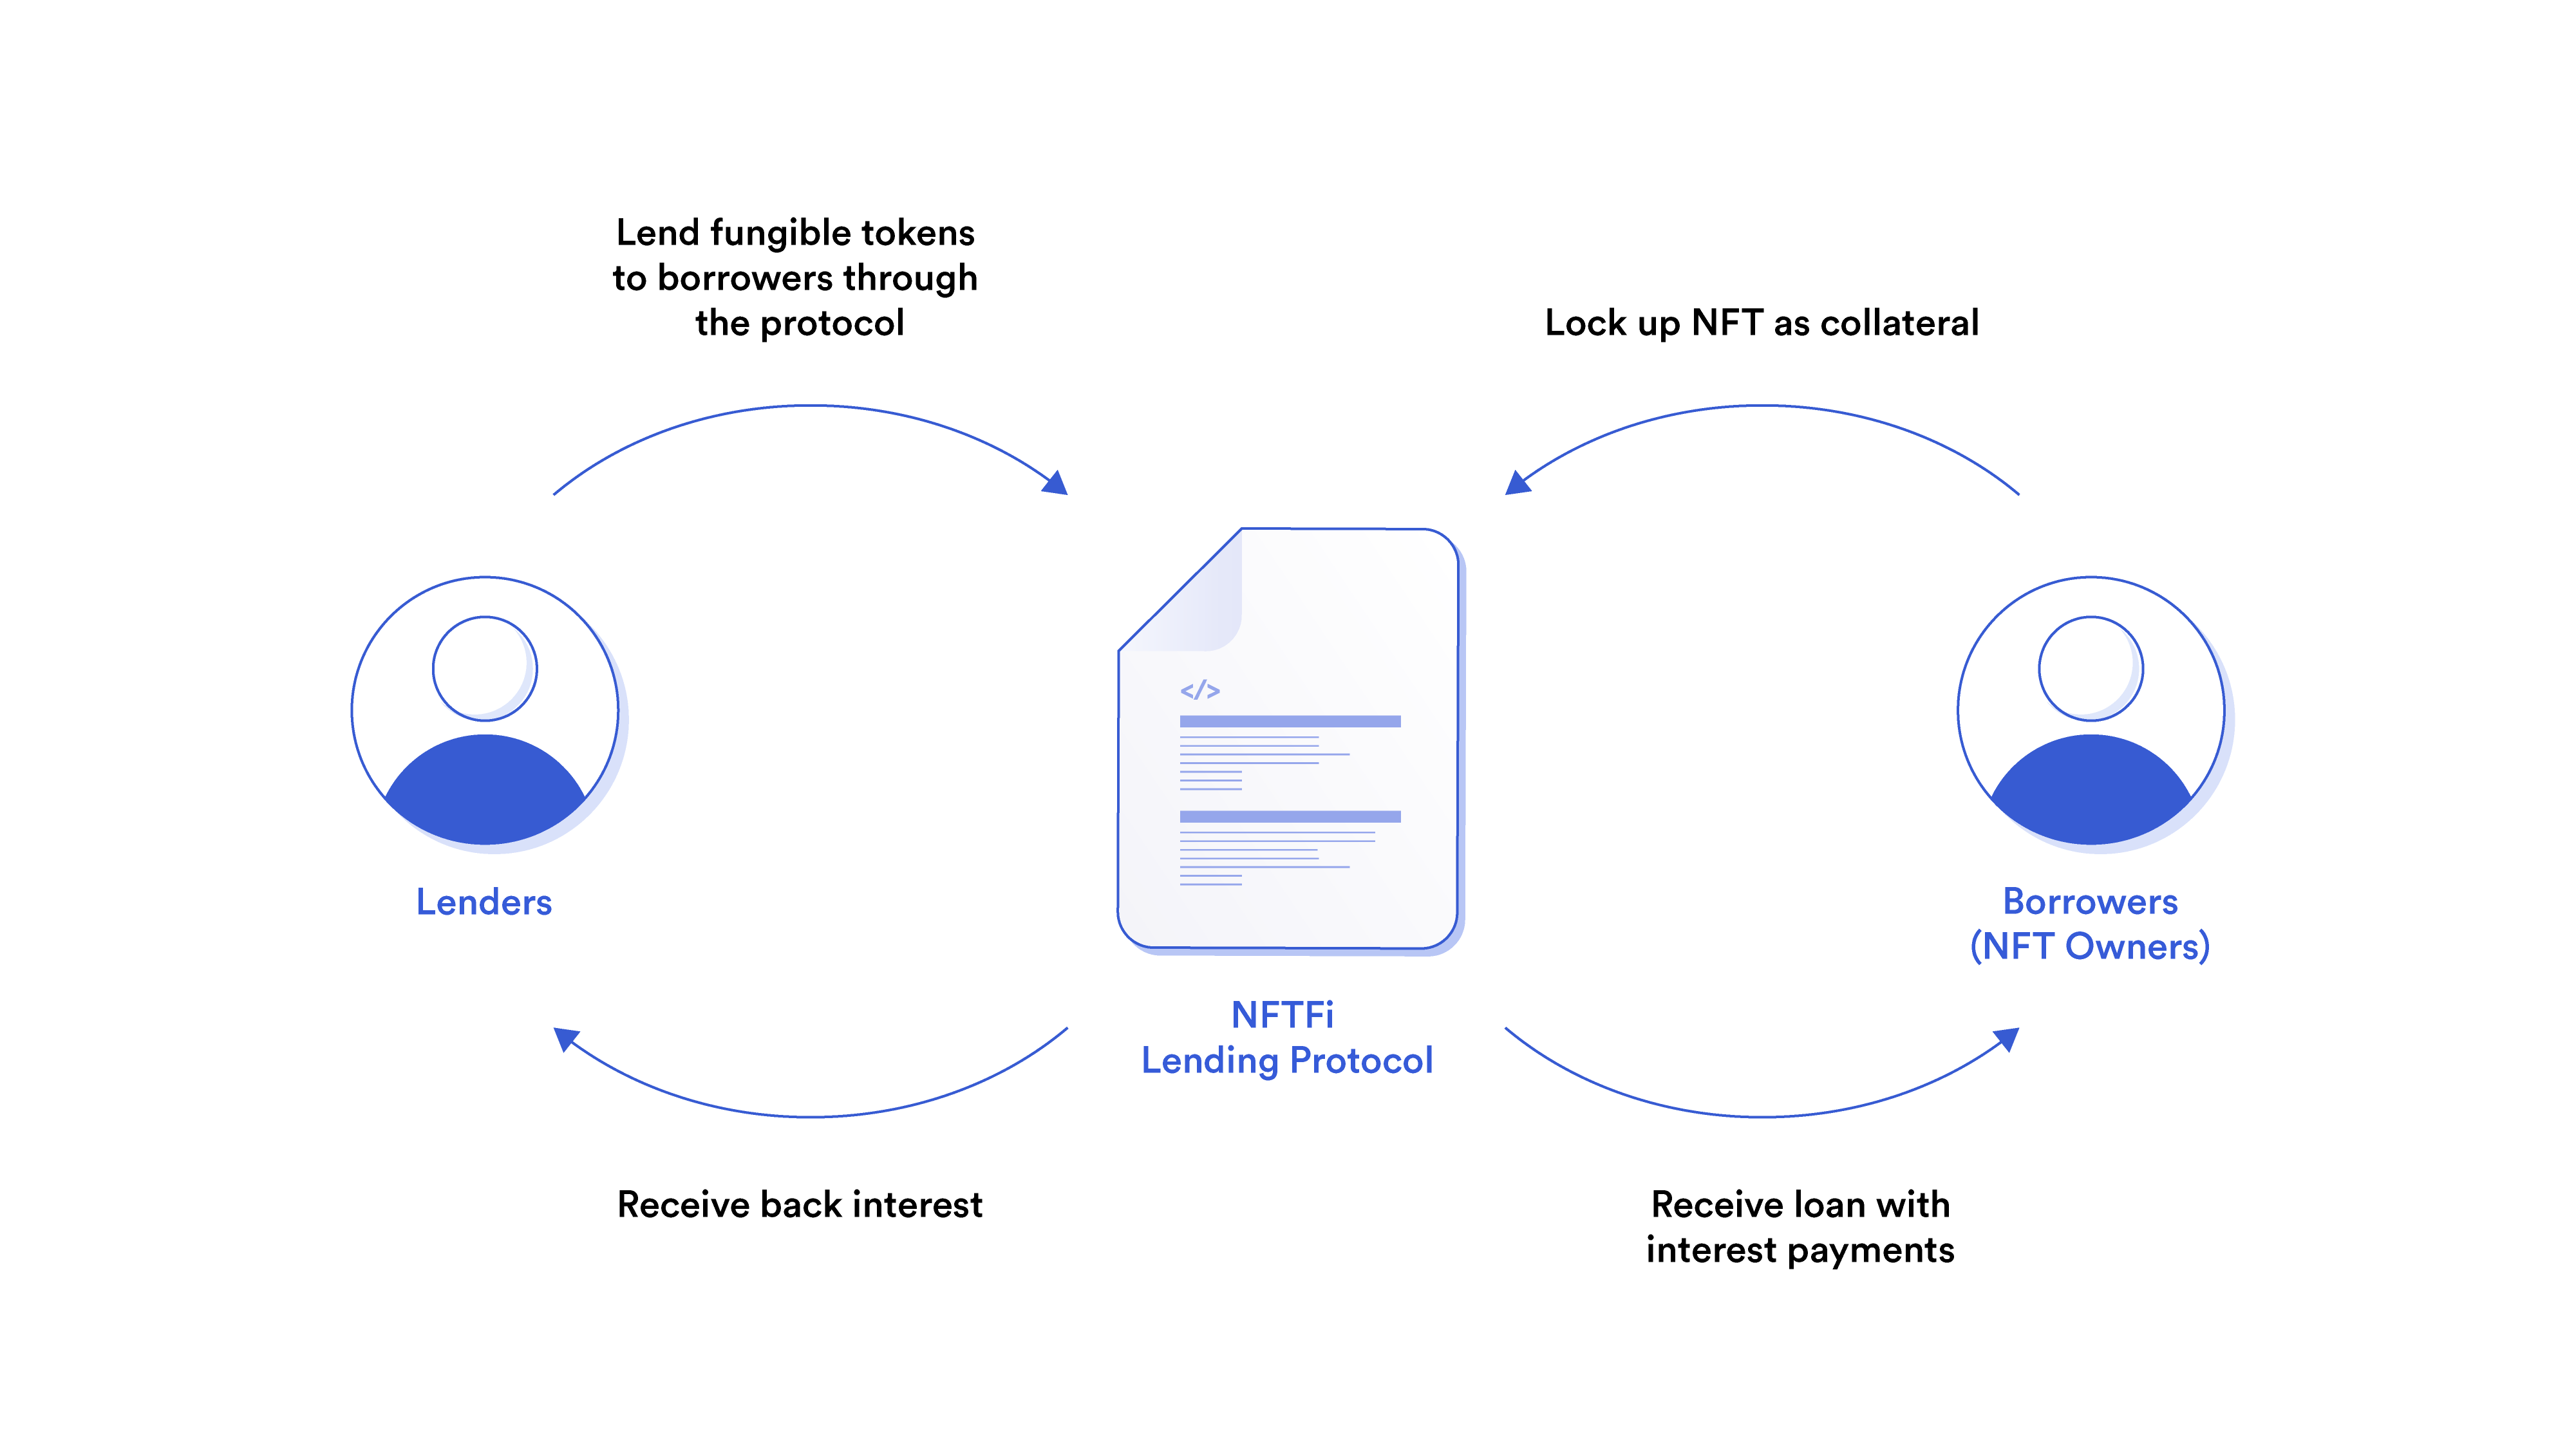 A diagram showing how NFT lending and borrowing works through NFTFi protocols.